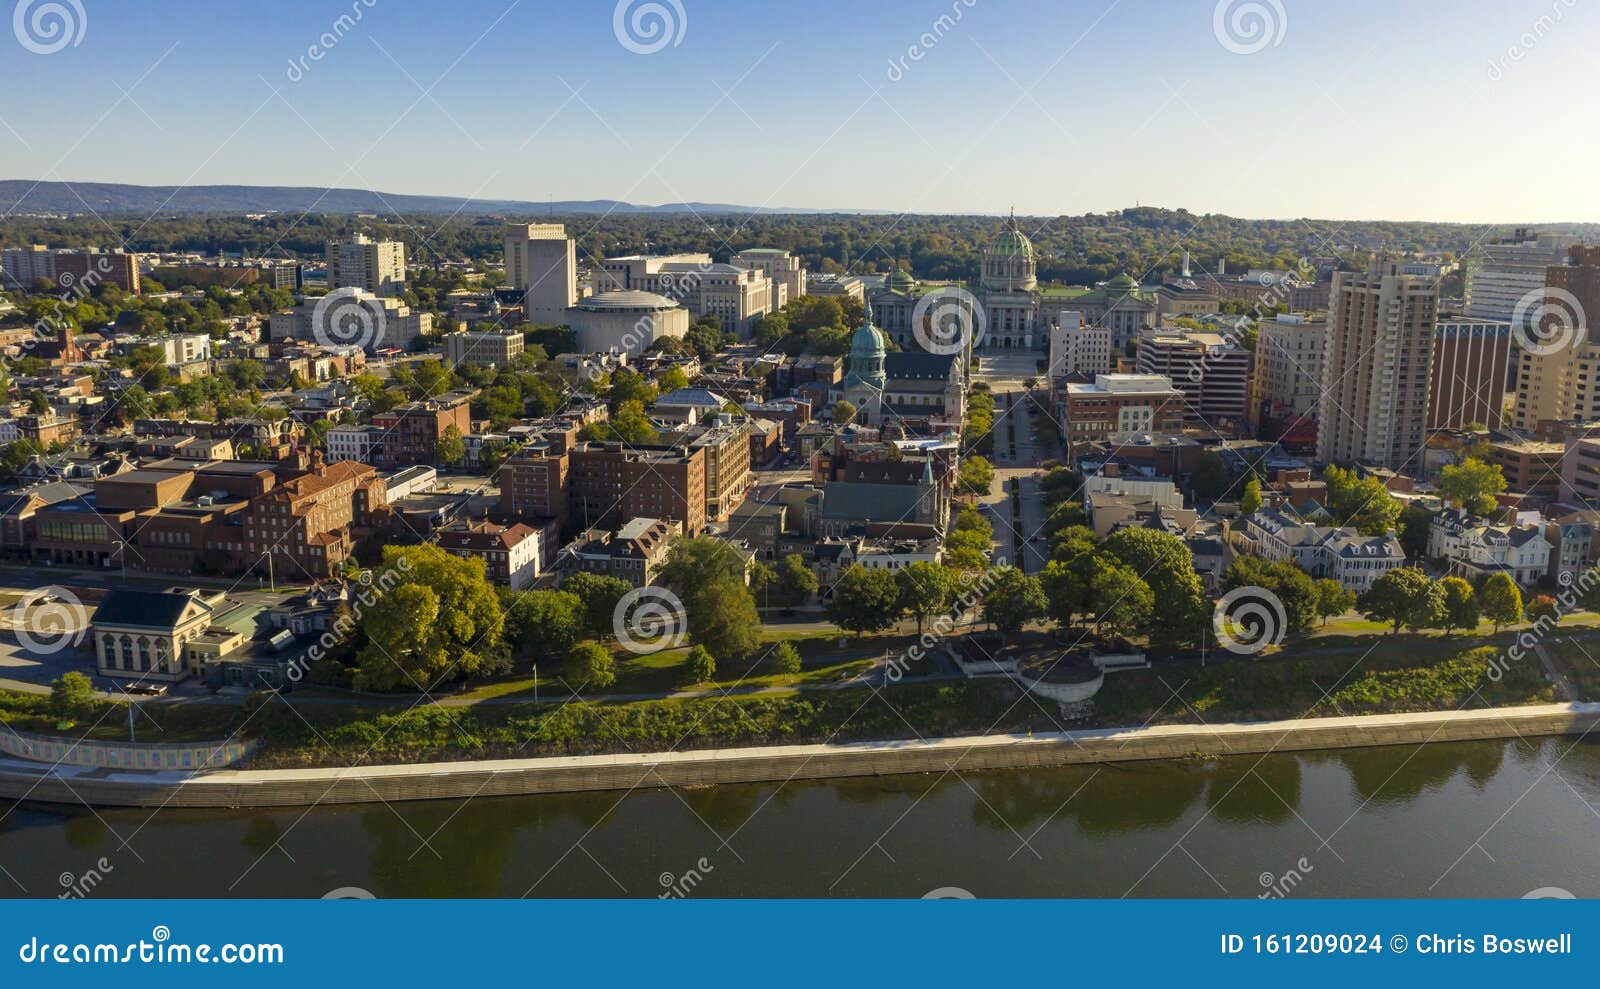 960 Pennsylvania State Capital Photos Free Royalty Free Stock Photos From Dreamstime